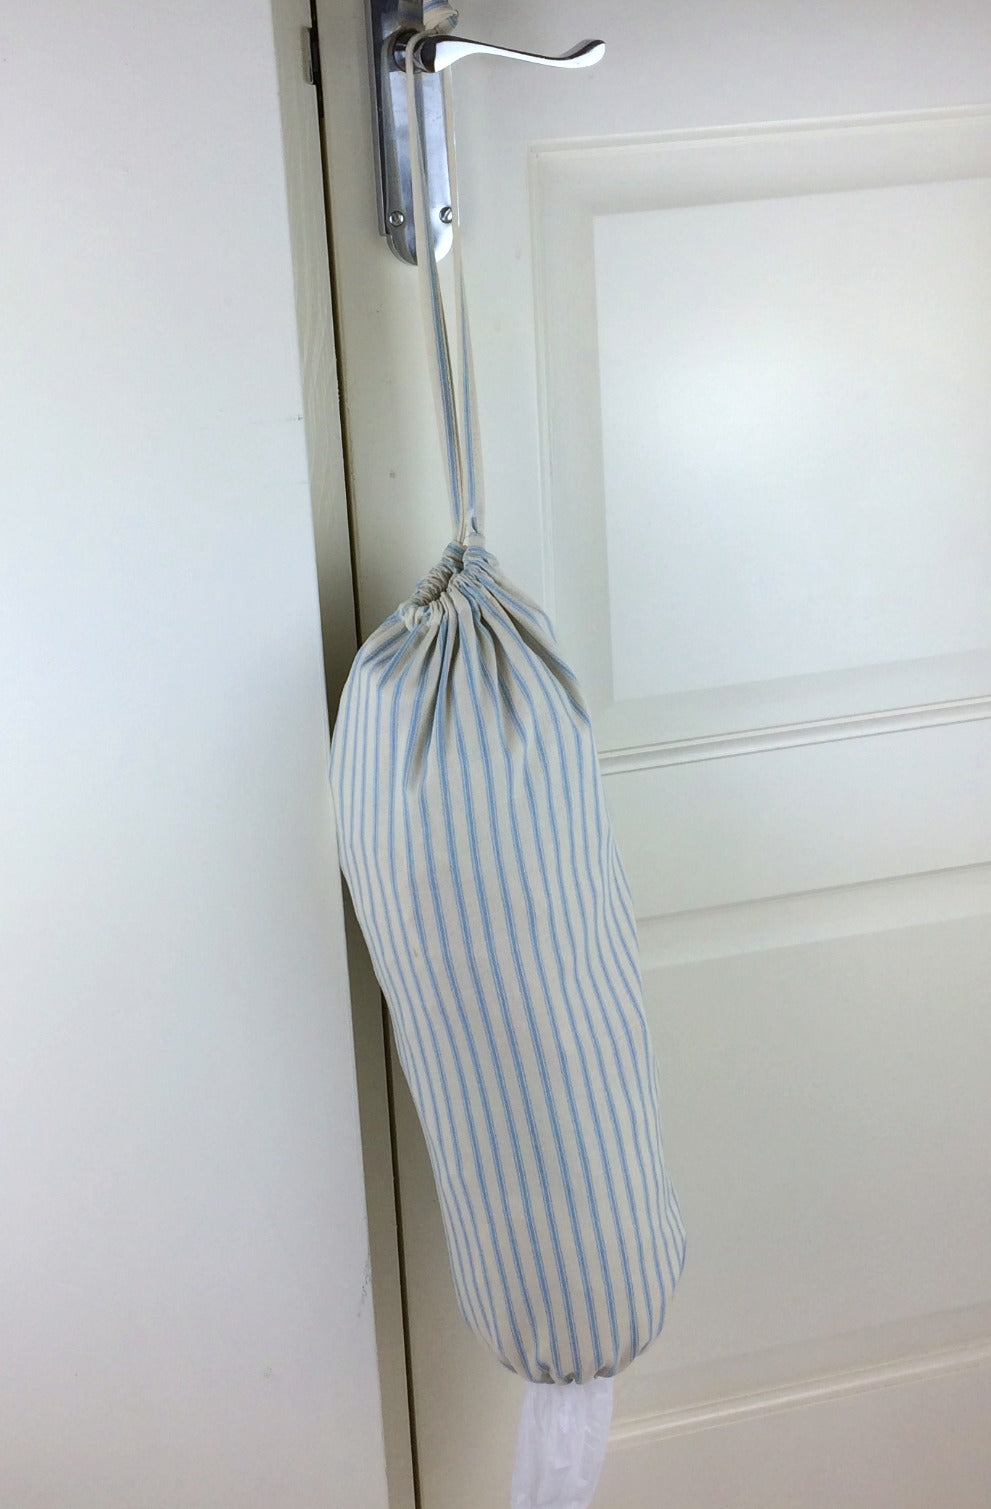 plastic bag dispenser and holder for those pesky bags for life that take over this one is light blue ticking stripe